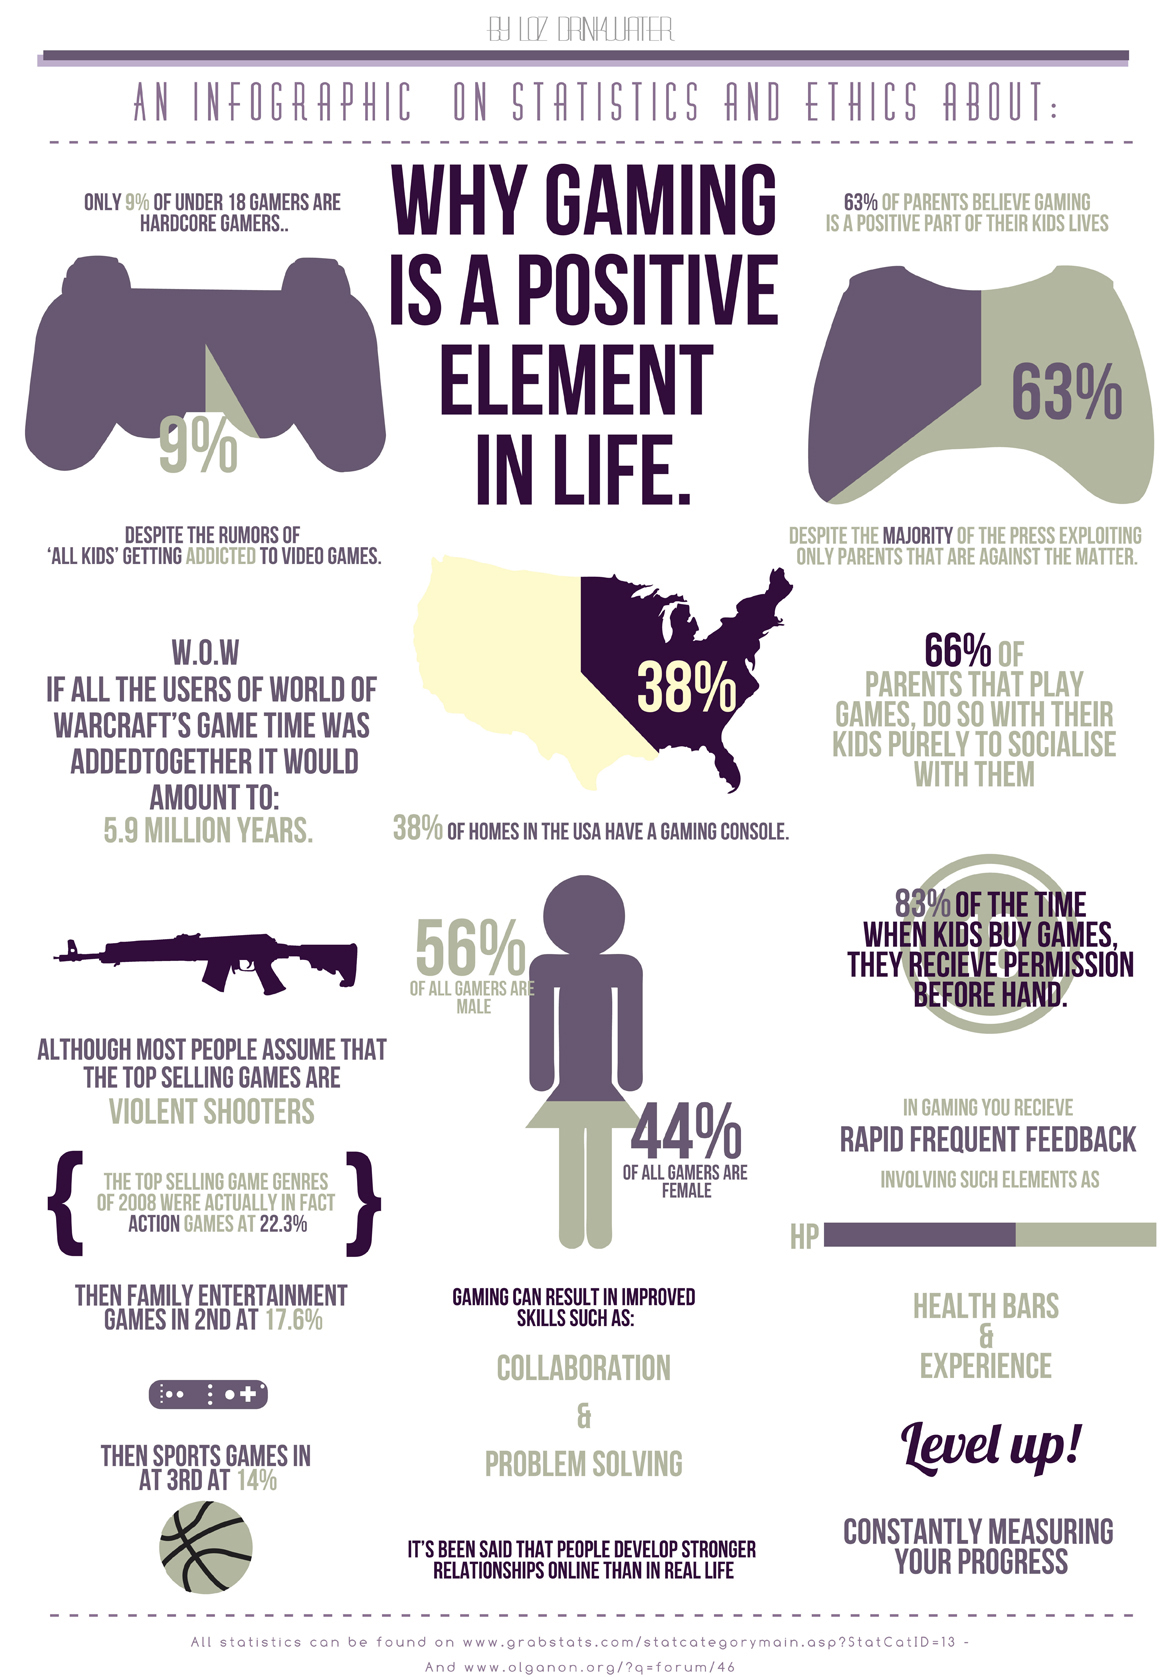 Why Gaming is a Positive Element in Life